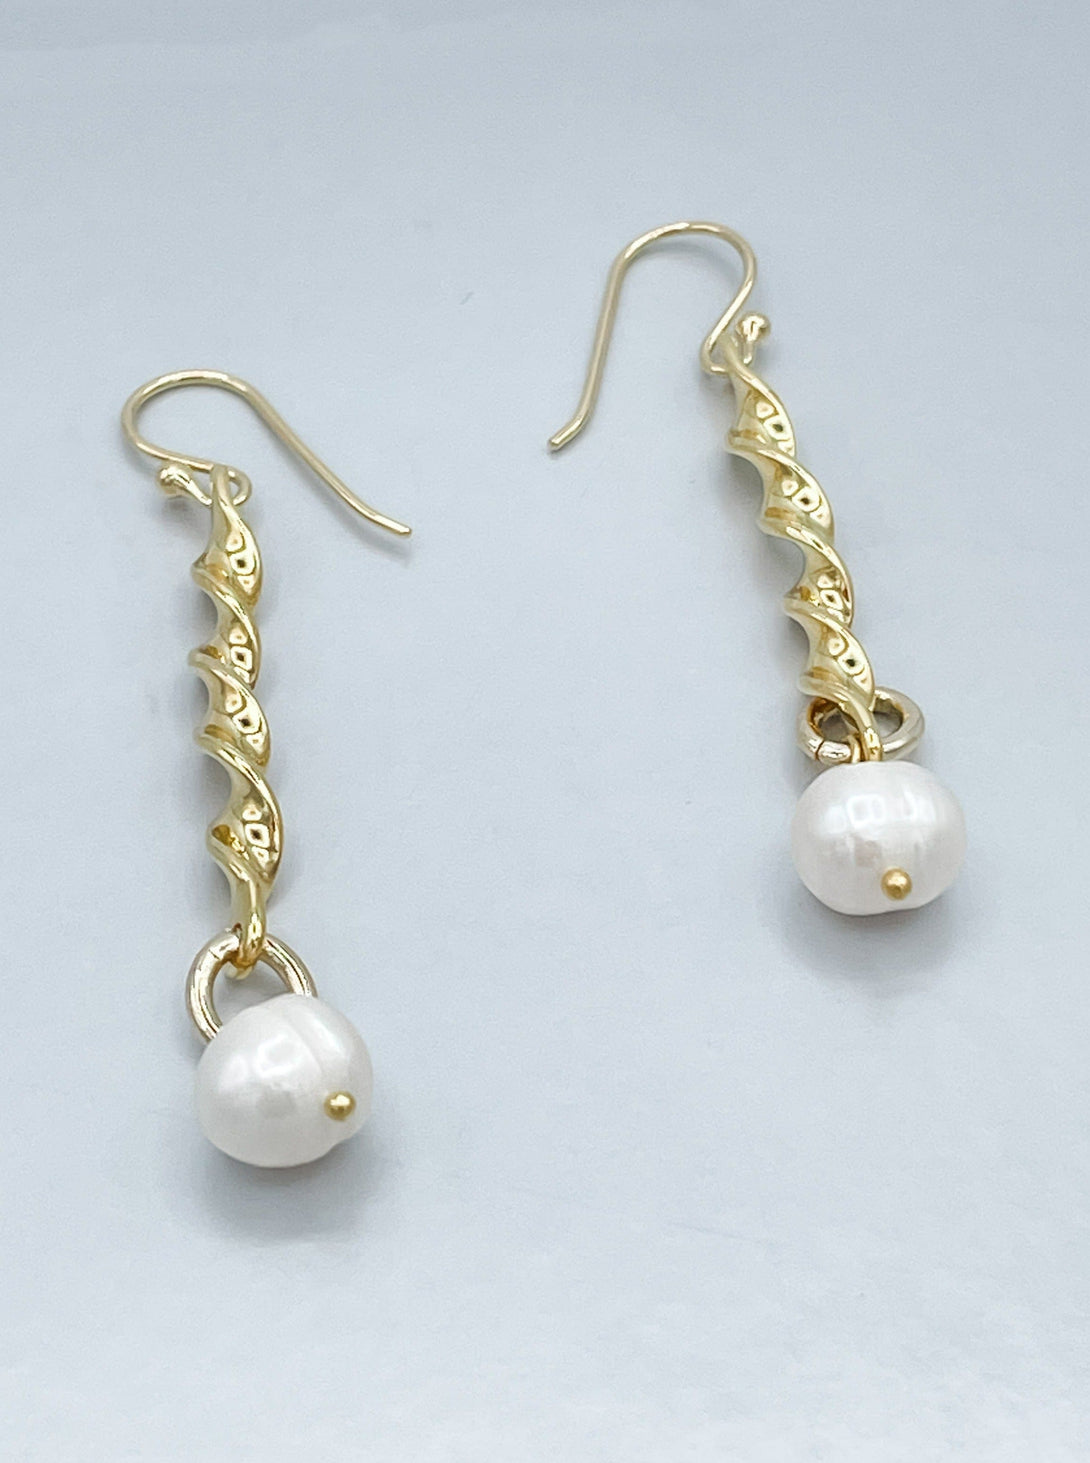 Gold and Single Pearl Earrings